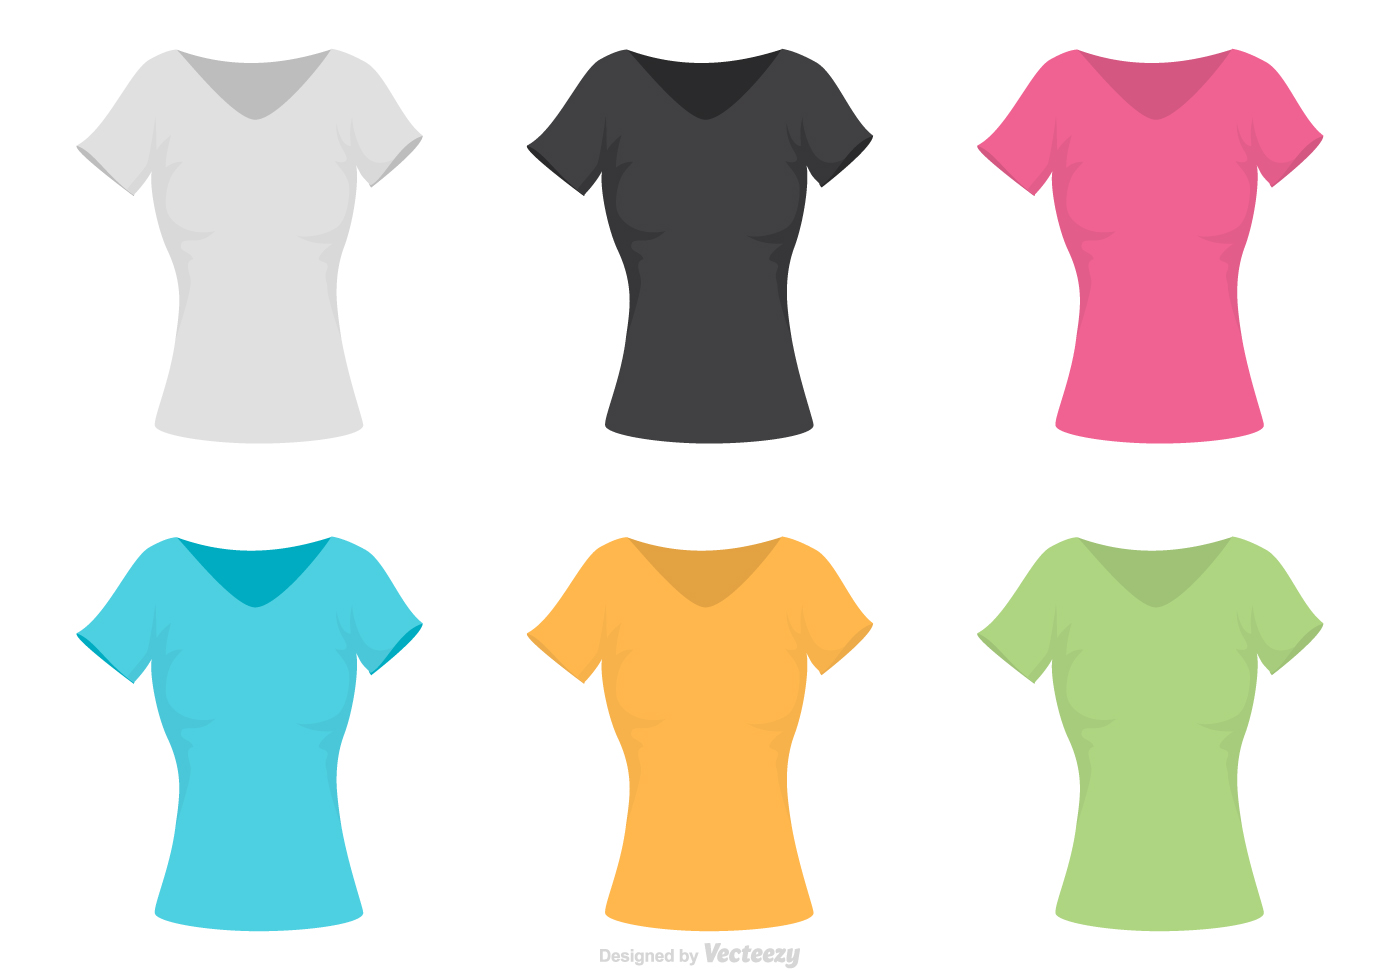 Female V Neck Shirt Template Vector - Download Free ...